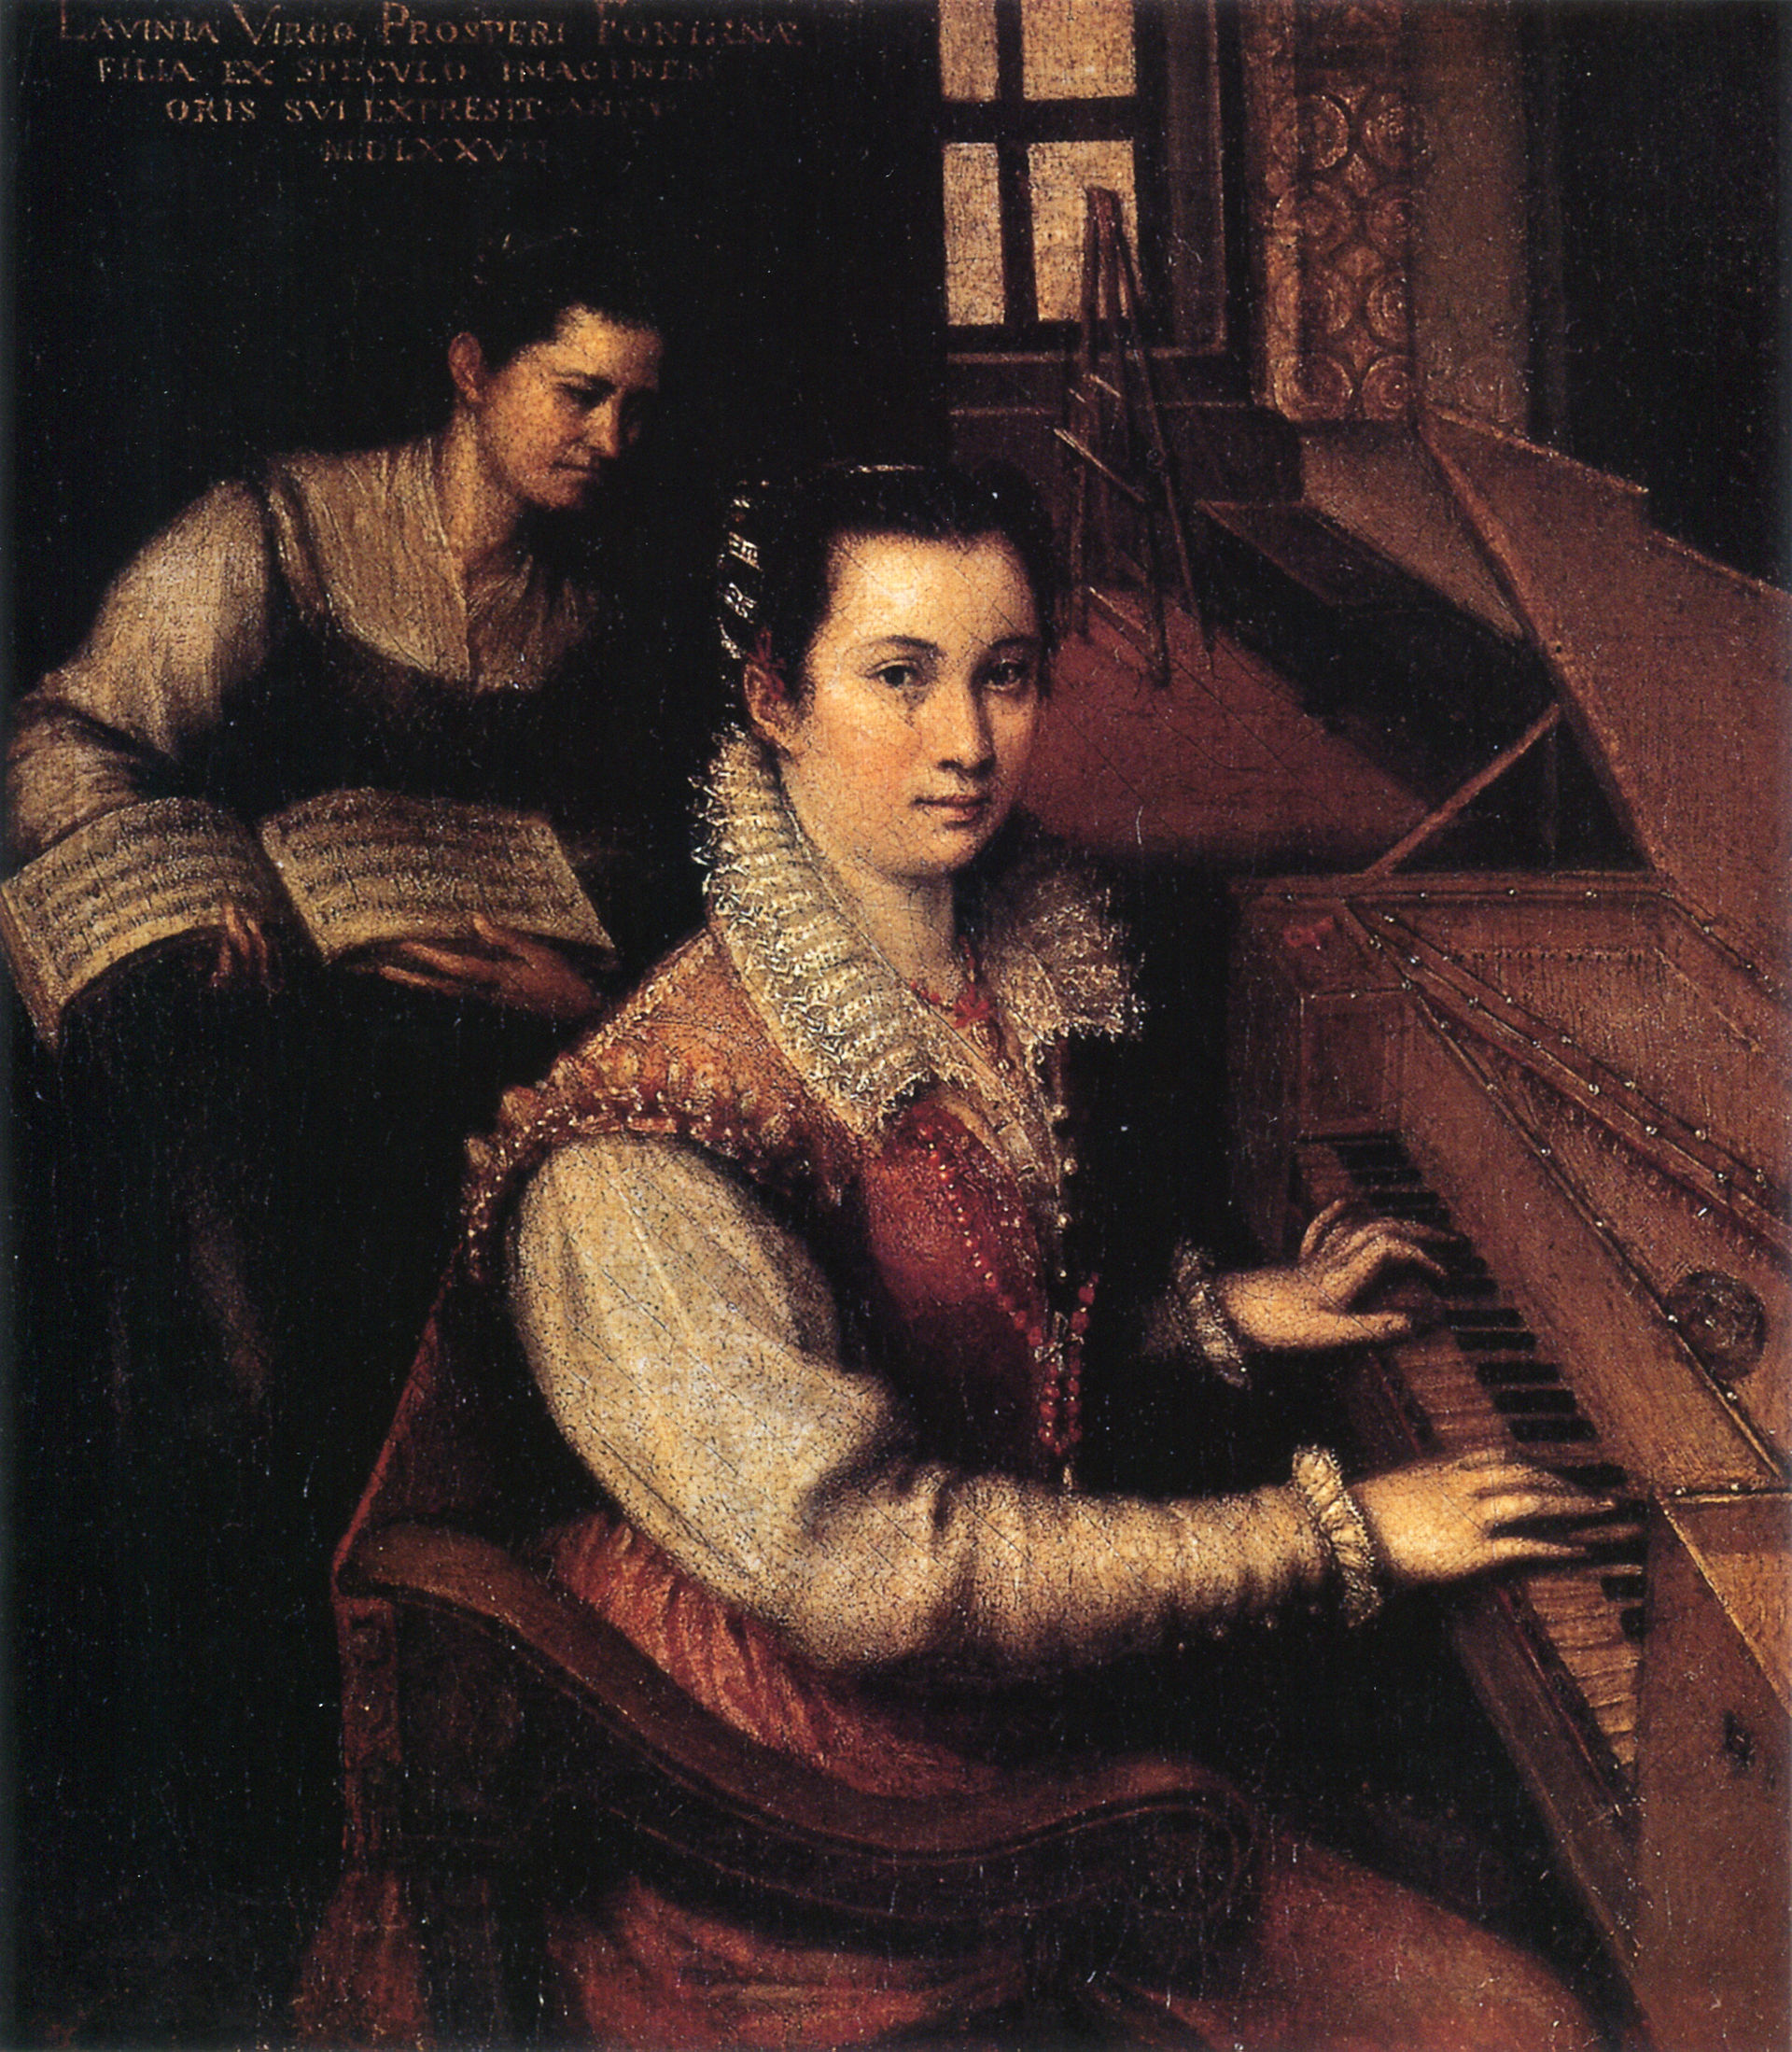 The artist sits at a clavichord, shown at half-length and turned so her right side is visible. She looks out directly at the viewer. Behind her, another woman brings her sheet music. In the background, the room is furnished with a bench, a window, and an empty easel. An inscription at the top left corner of the painting identifies the artist.